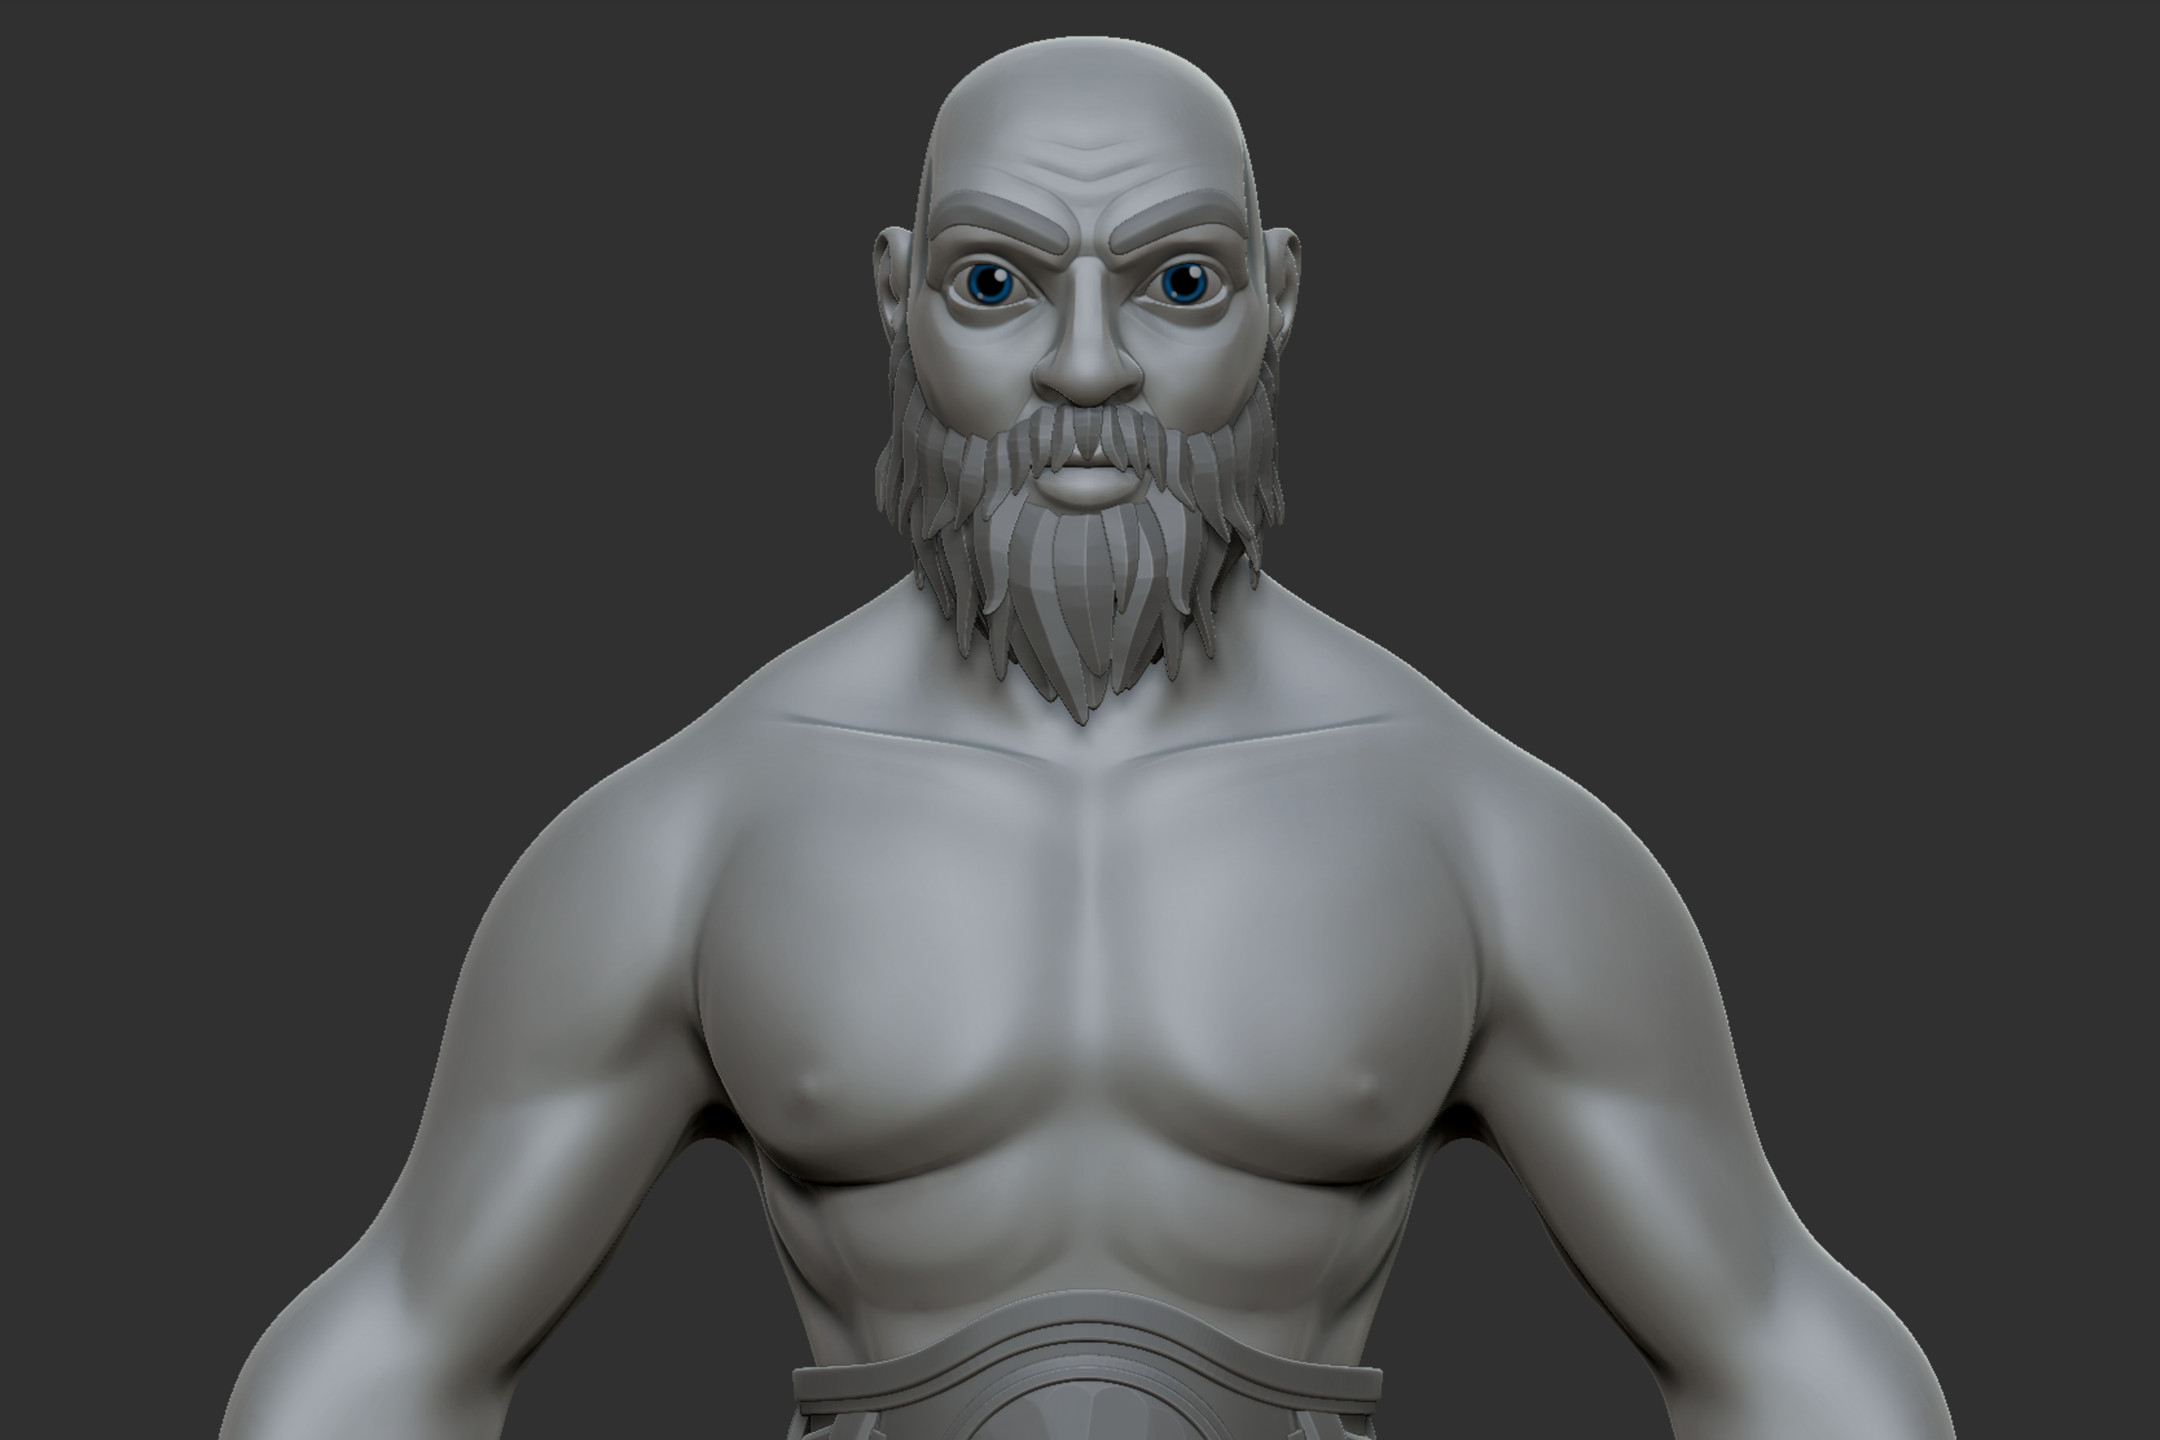 High poly - Closeup. The final step of creating the body was the careful use of a mass applied surface polish mod. This gave a ton of definition and sharpness to the face with no effort.